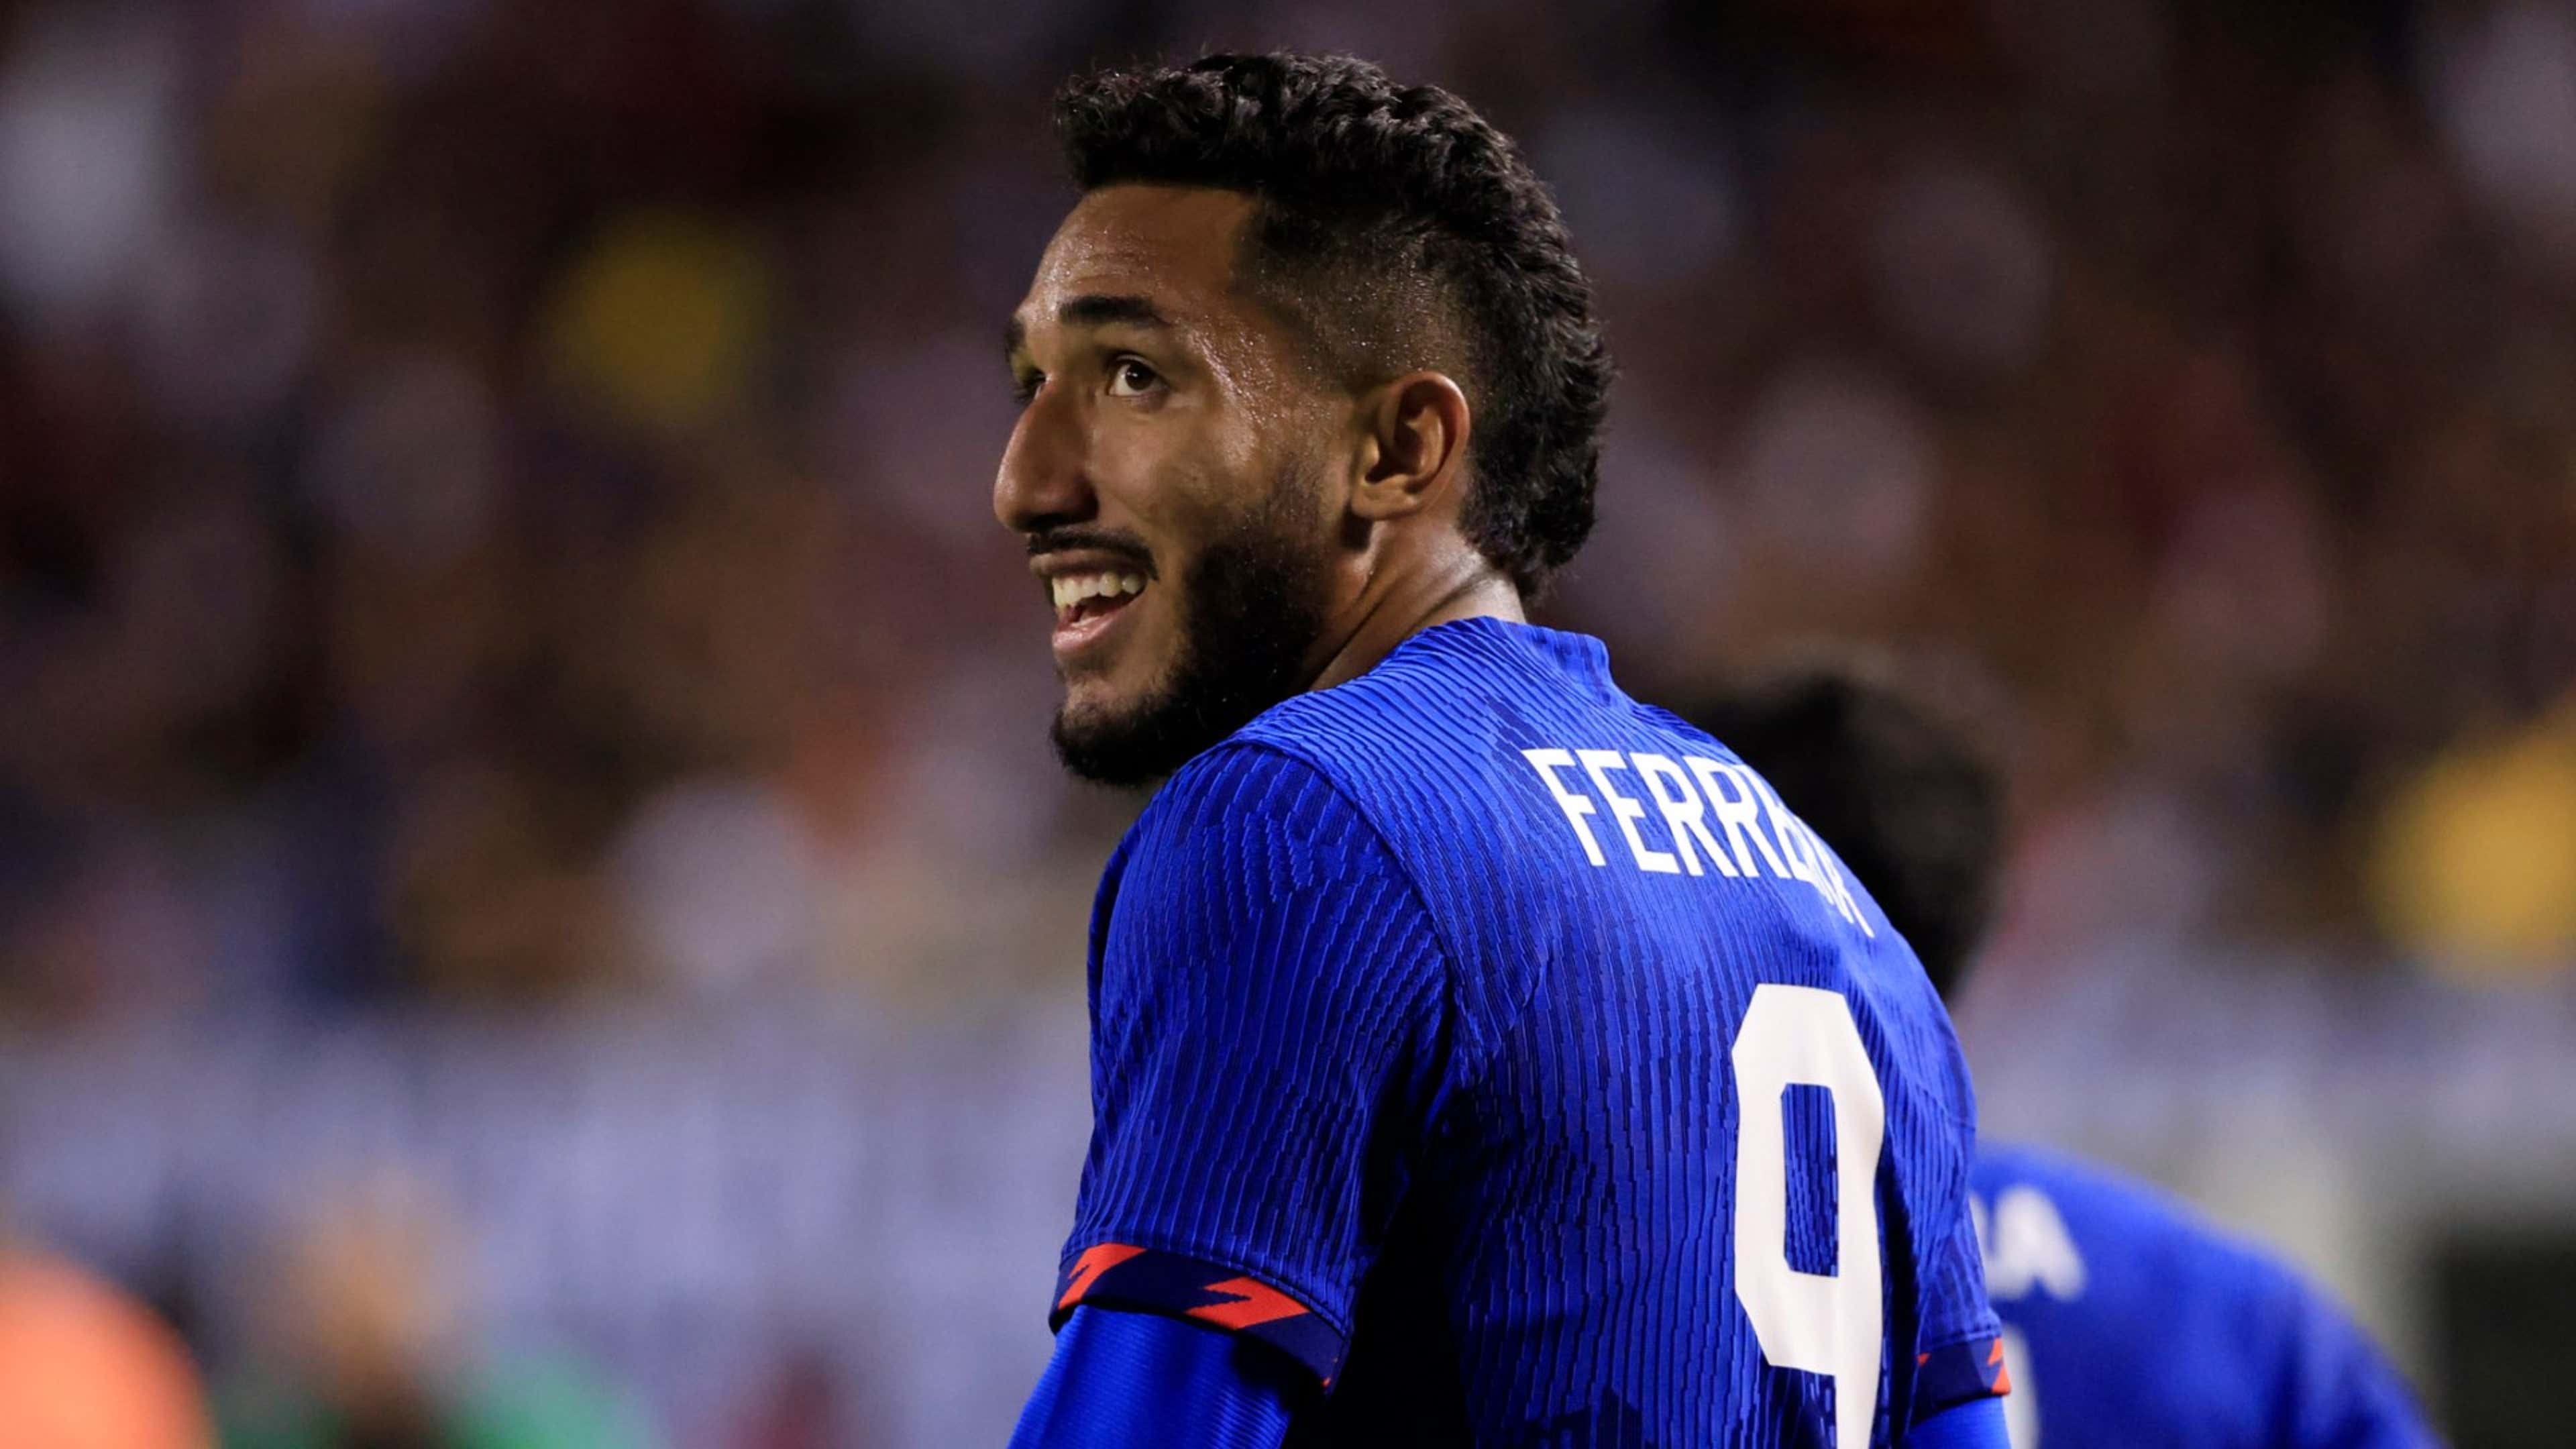 USMNT's Jesús Ferreira scores historic 2nd straight hat trick in 6-0 win  over Trinidad & Tobago to clinch Gold Cup group - Yahoo Sports